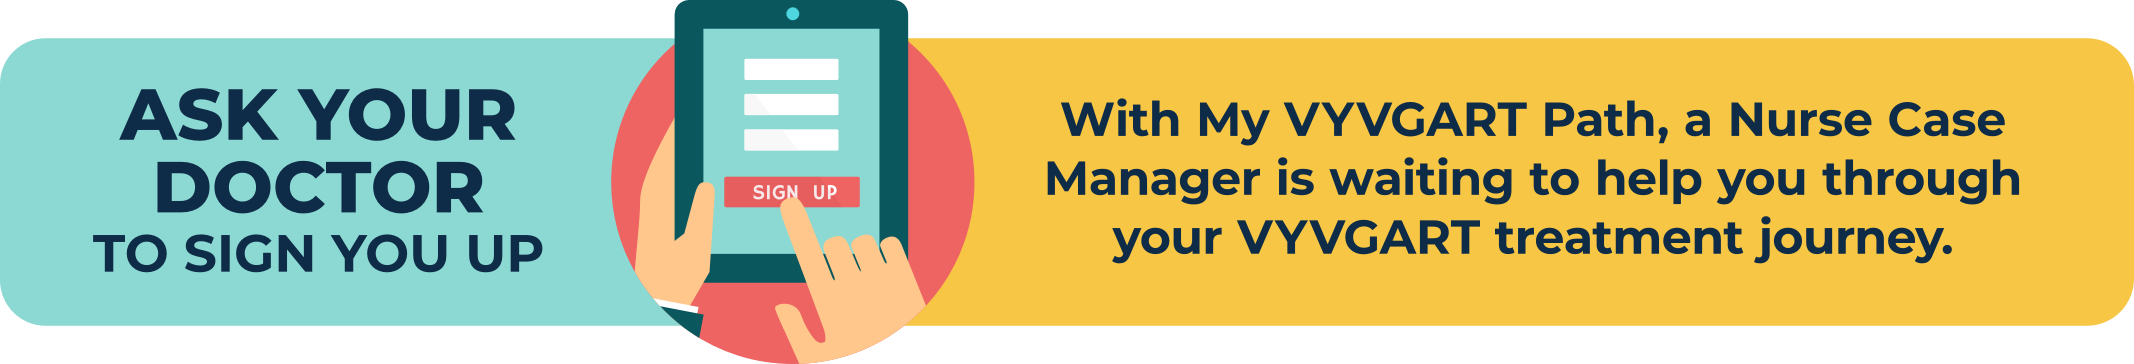 Ask your doctor to sign you up. With My VYVGART Path, a Nurse Case Manager is waiting to help you through your VYVGART treatment journey.